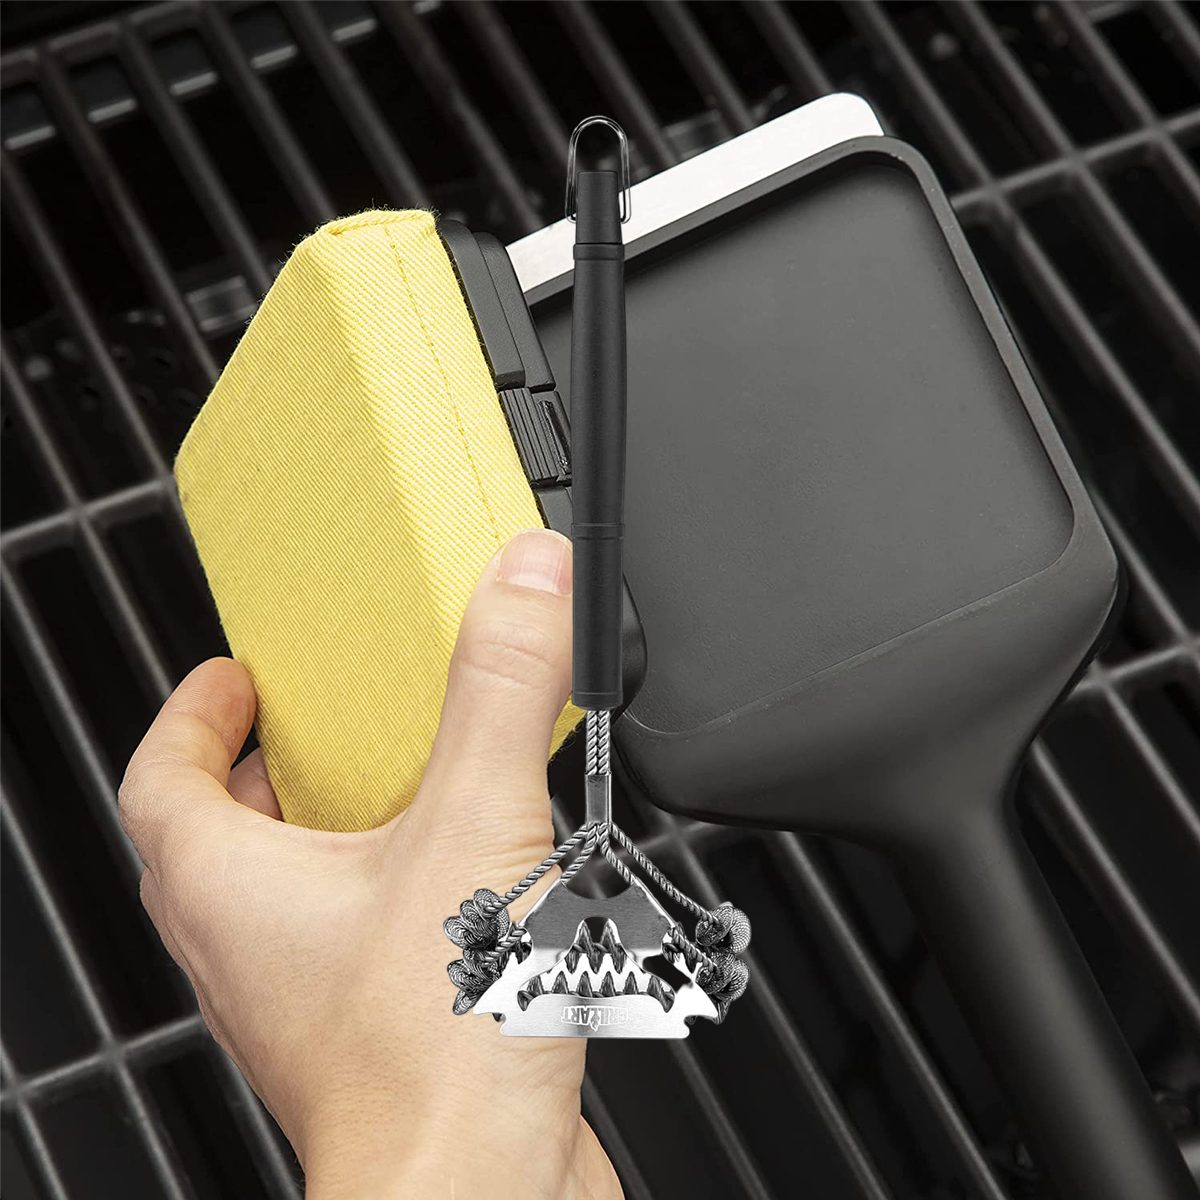 6 Best Grill Cleaning Brushes in 2023: Tested by Food Experts